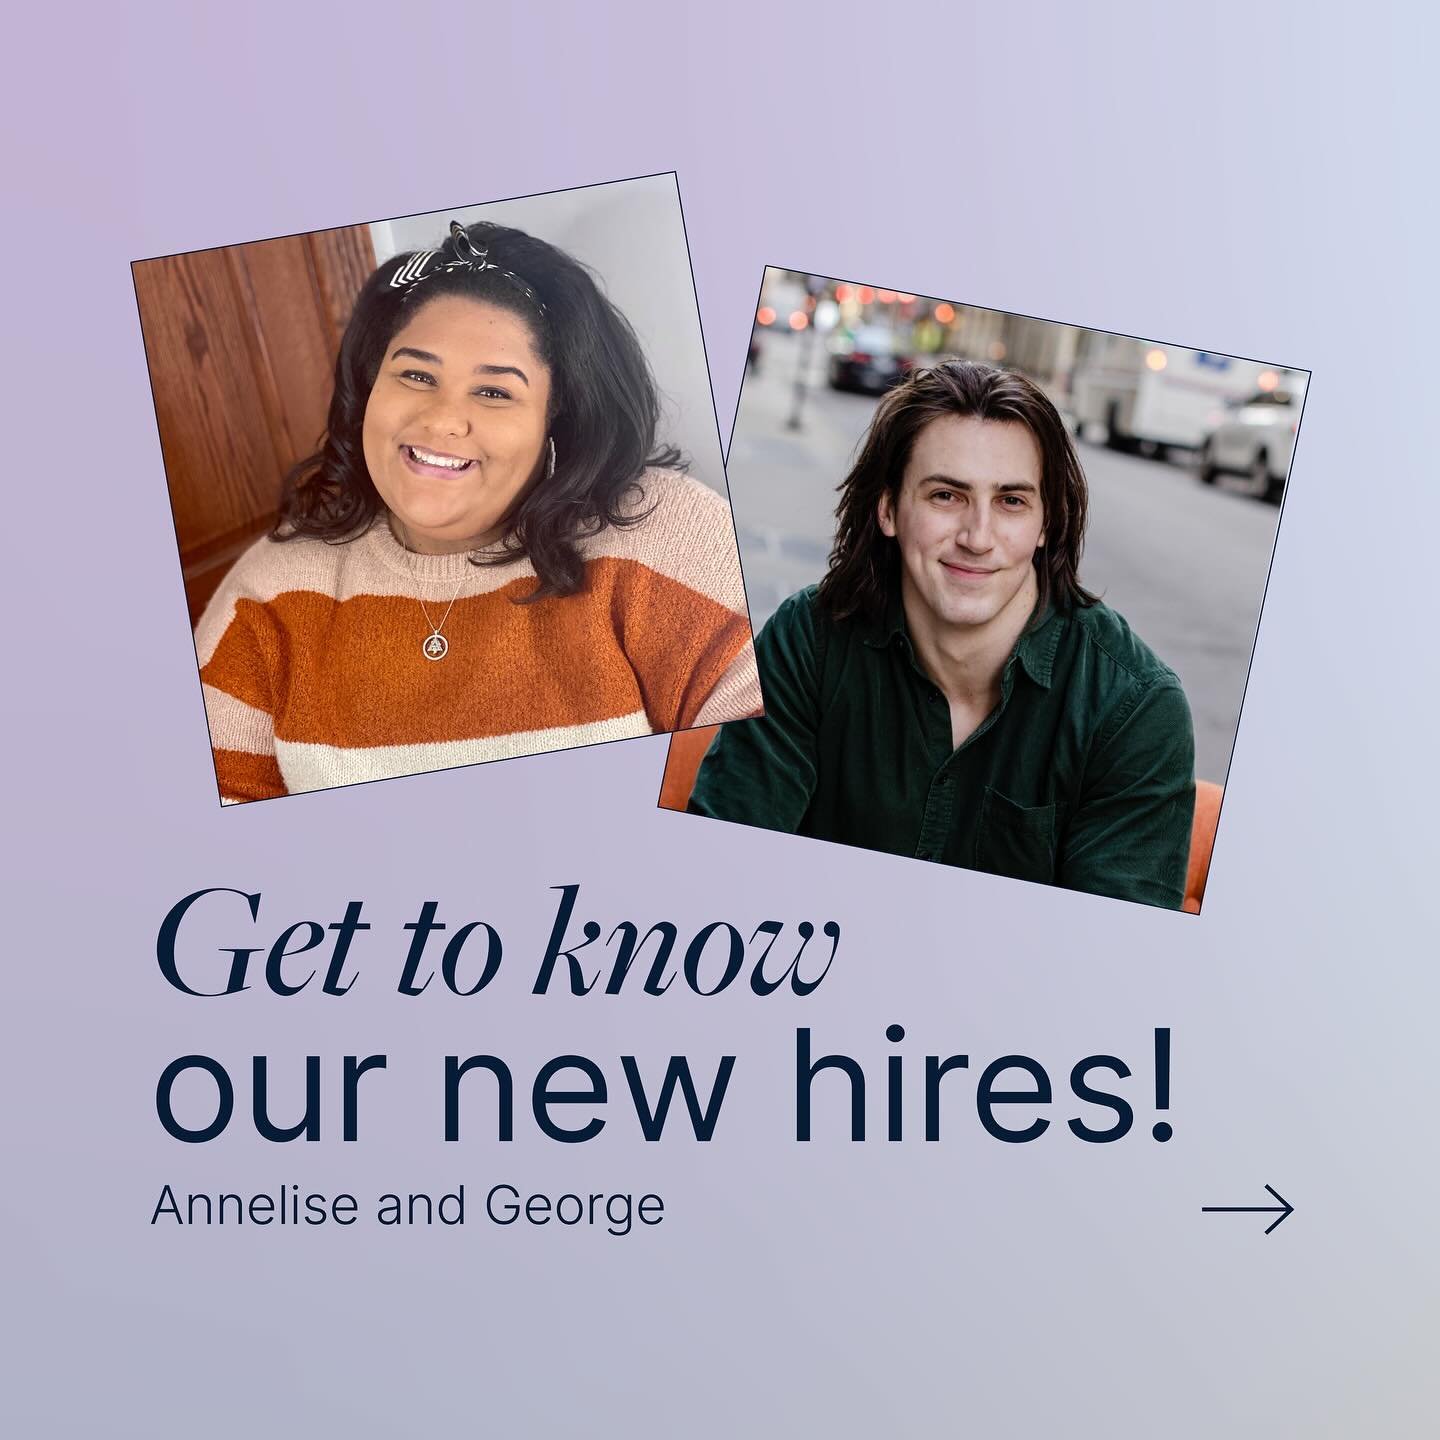 Our latest #KWTSpotlight features the two newest additions to our Chicago office, Annelise Norton and George Seibold!&nbsp;🌟 🔦&nbsp;Swipe to learn more about what drew them to KWT and some fun facts you may not expect.&nbsp;💉💃&nbsp;Anything else 